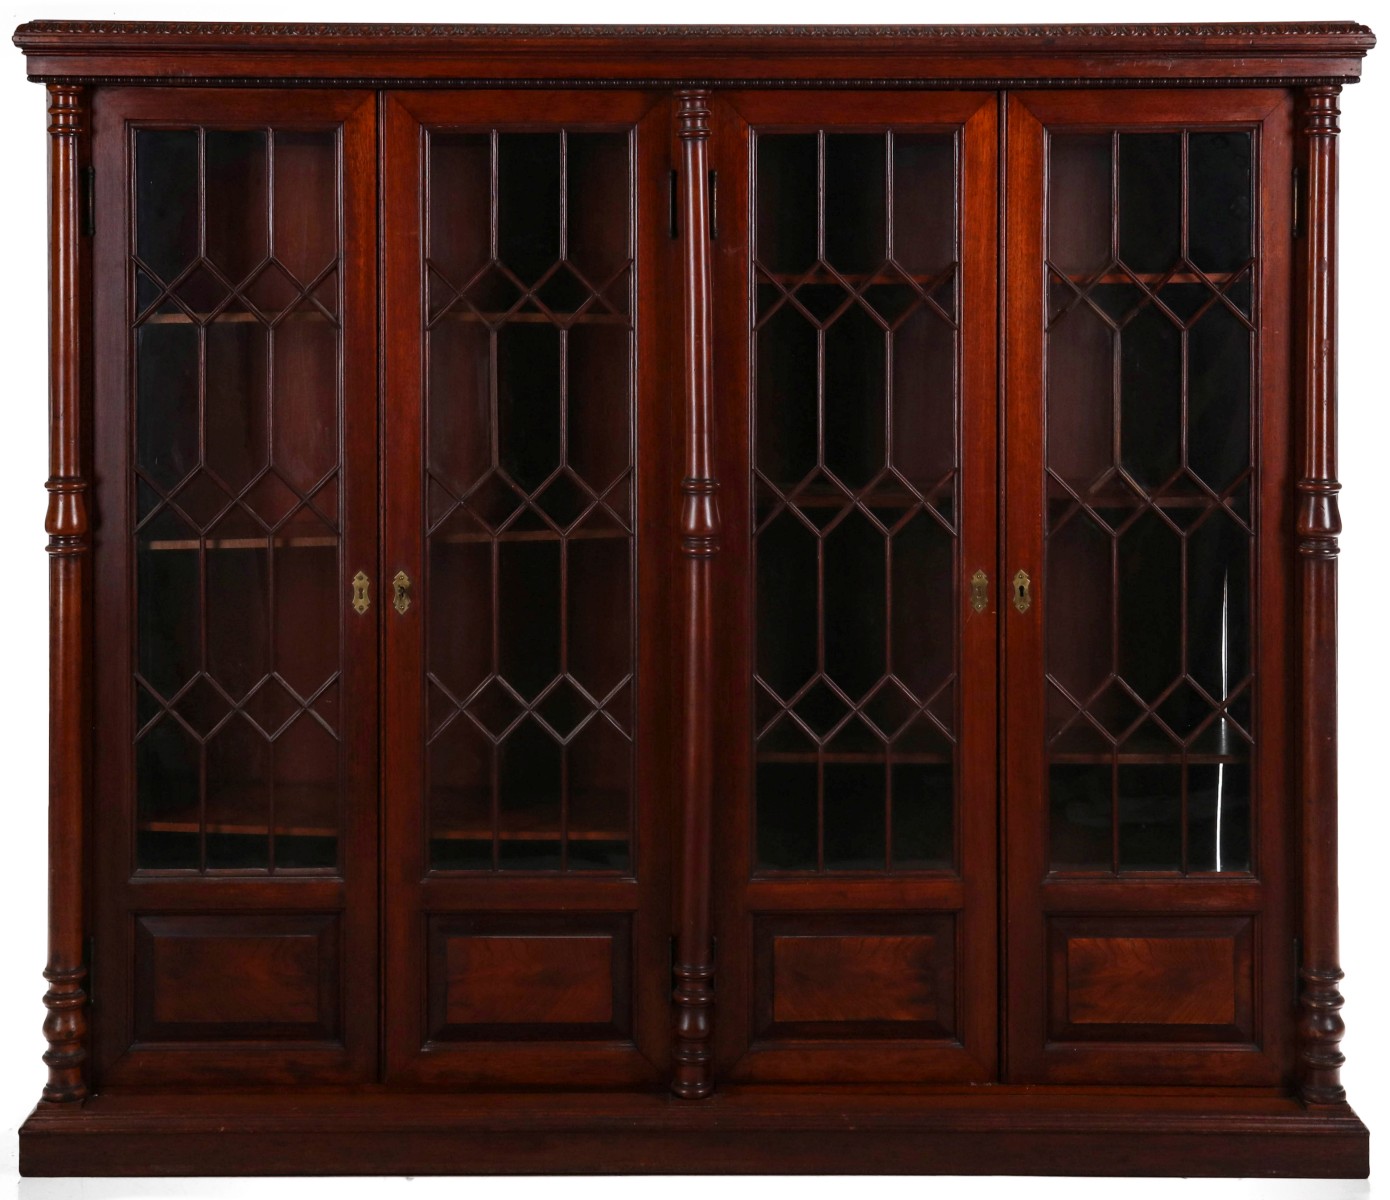 A HANDSOME EARLY 20TH CENTURY FOUR DOOR BOOKCASE